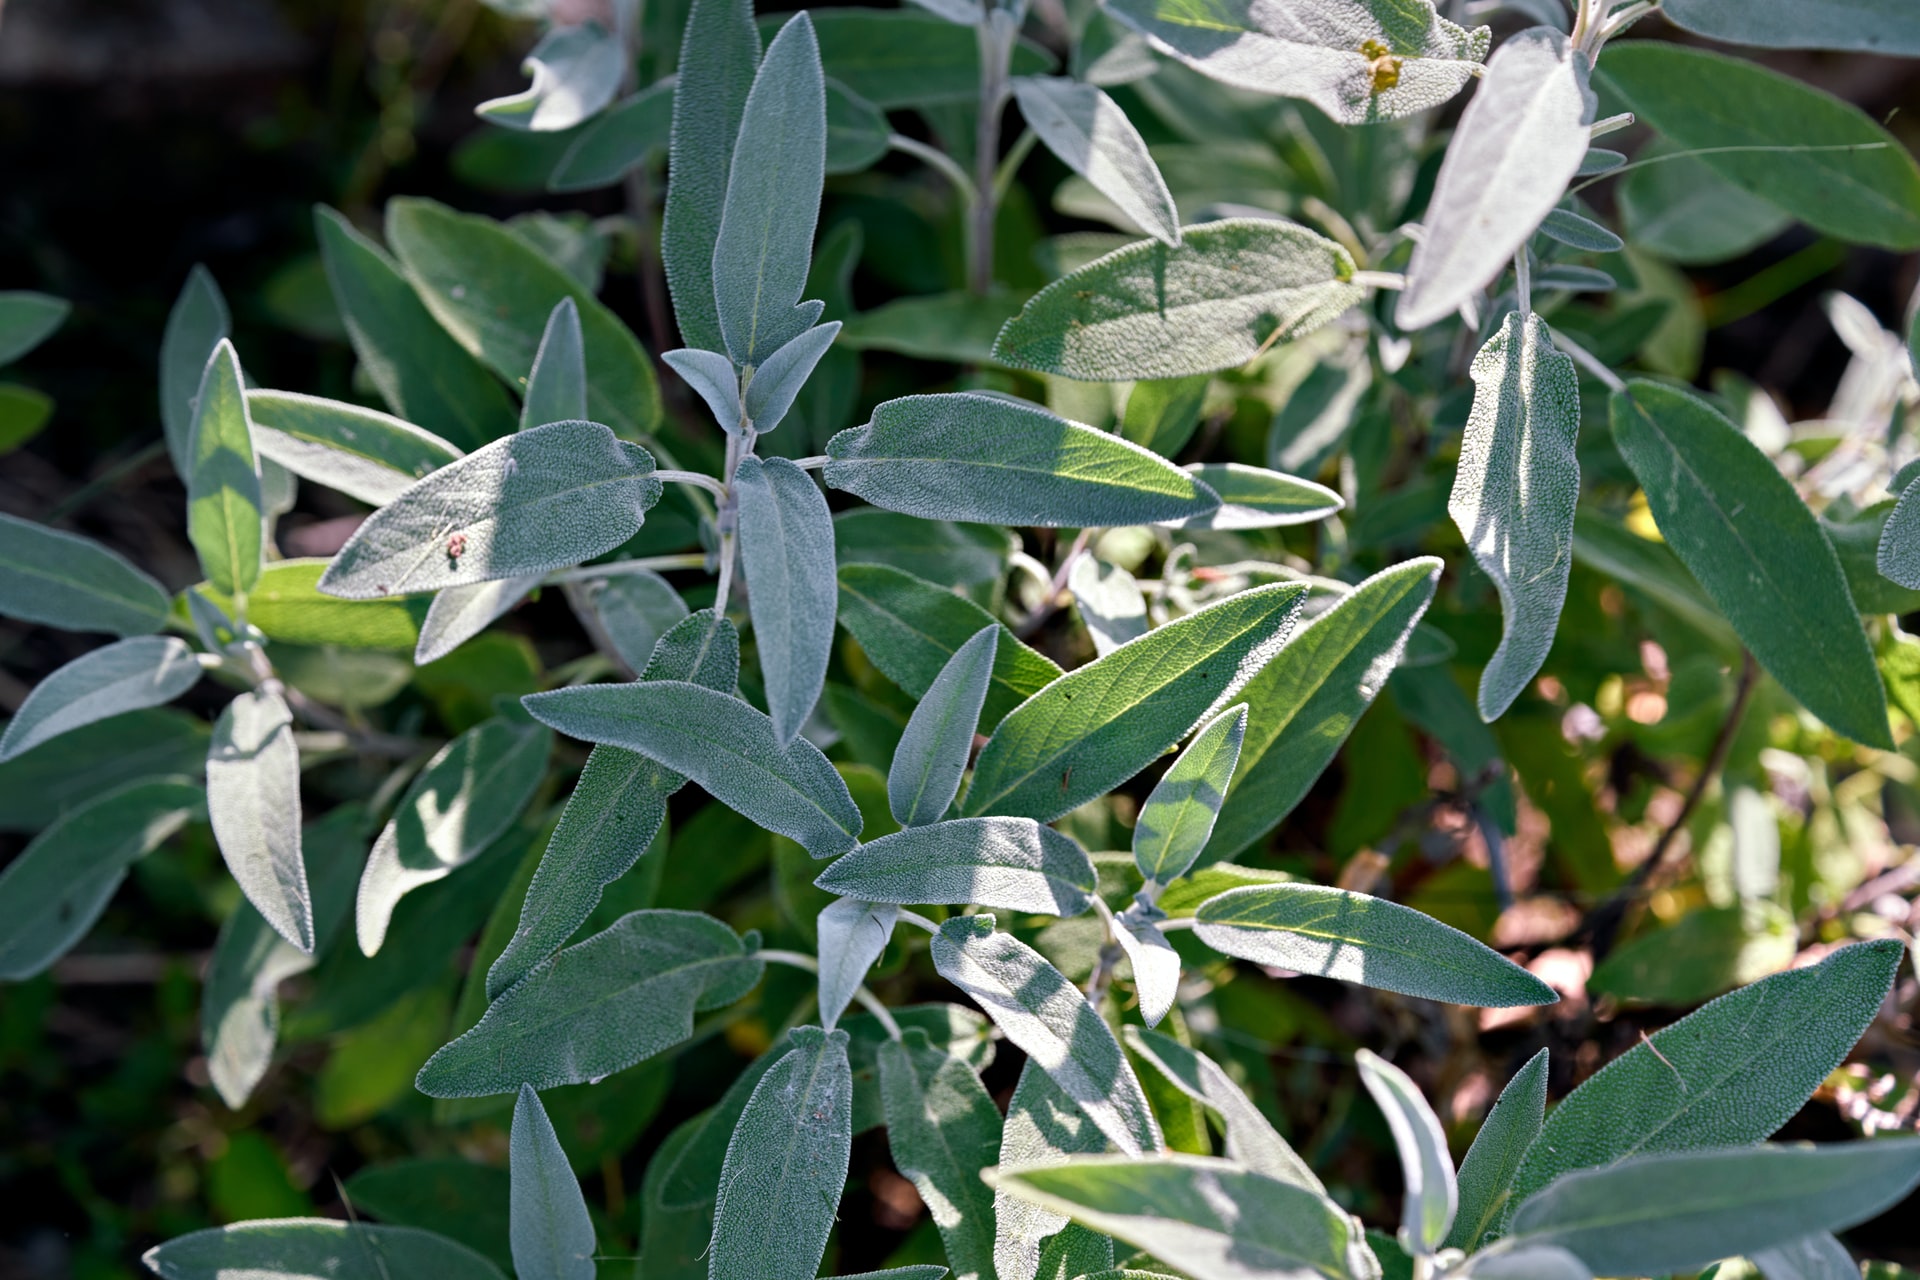 How to care for sage?